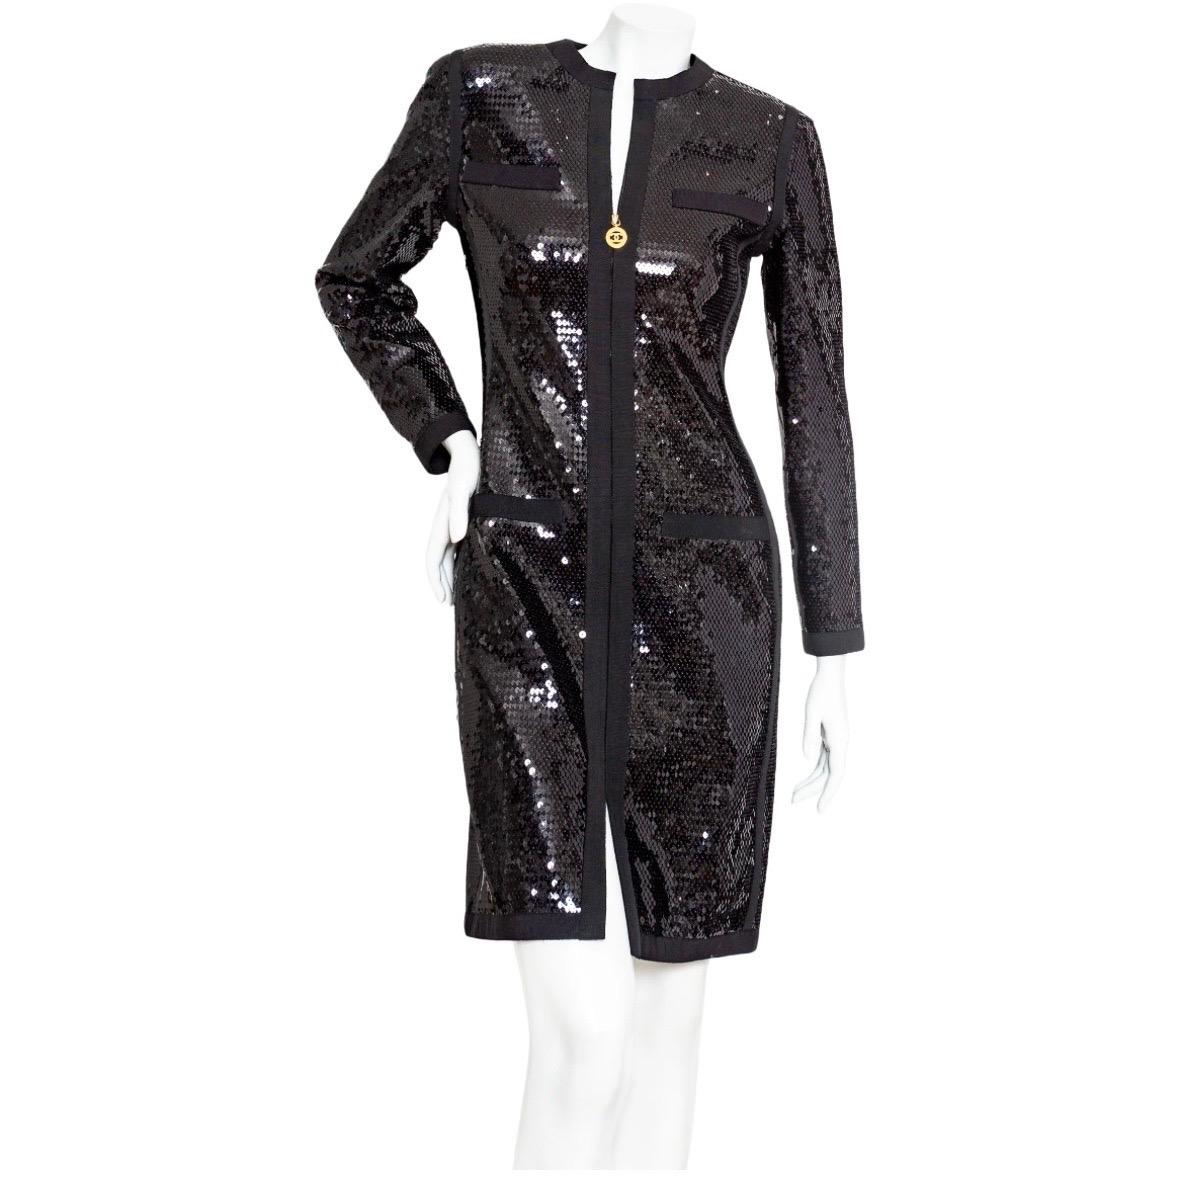 Chanel 1991 Black Sequin Scuba Dress

Spring/Summer 1991 Collection by Karl Lagerfeld
Black
Long sleeve
Round neckline
Front zipper closure with gold-tone CC pull
Twill ribbon trim
Mini length
Sequin; silk lining
Made in France
Great pre-owned